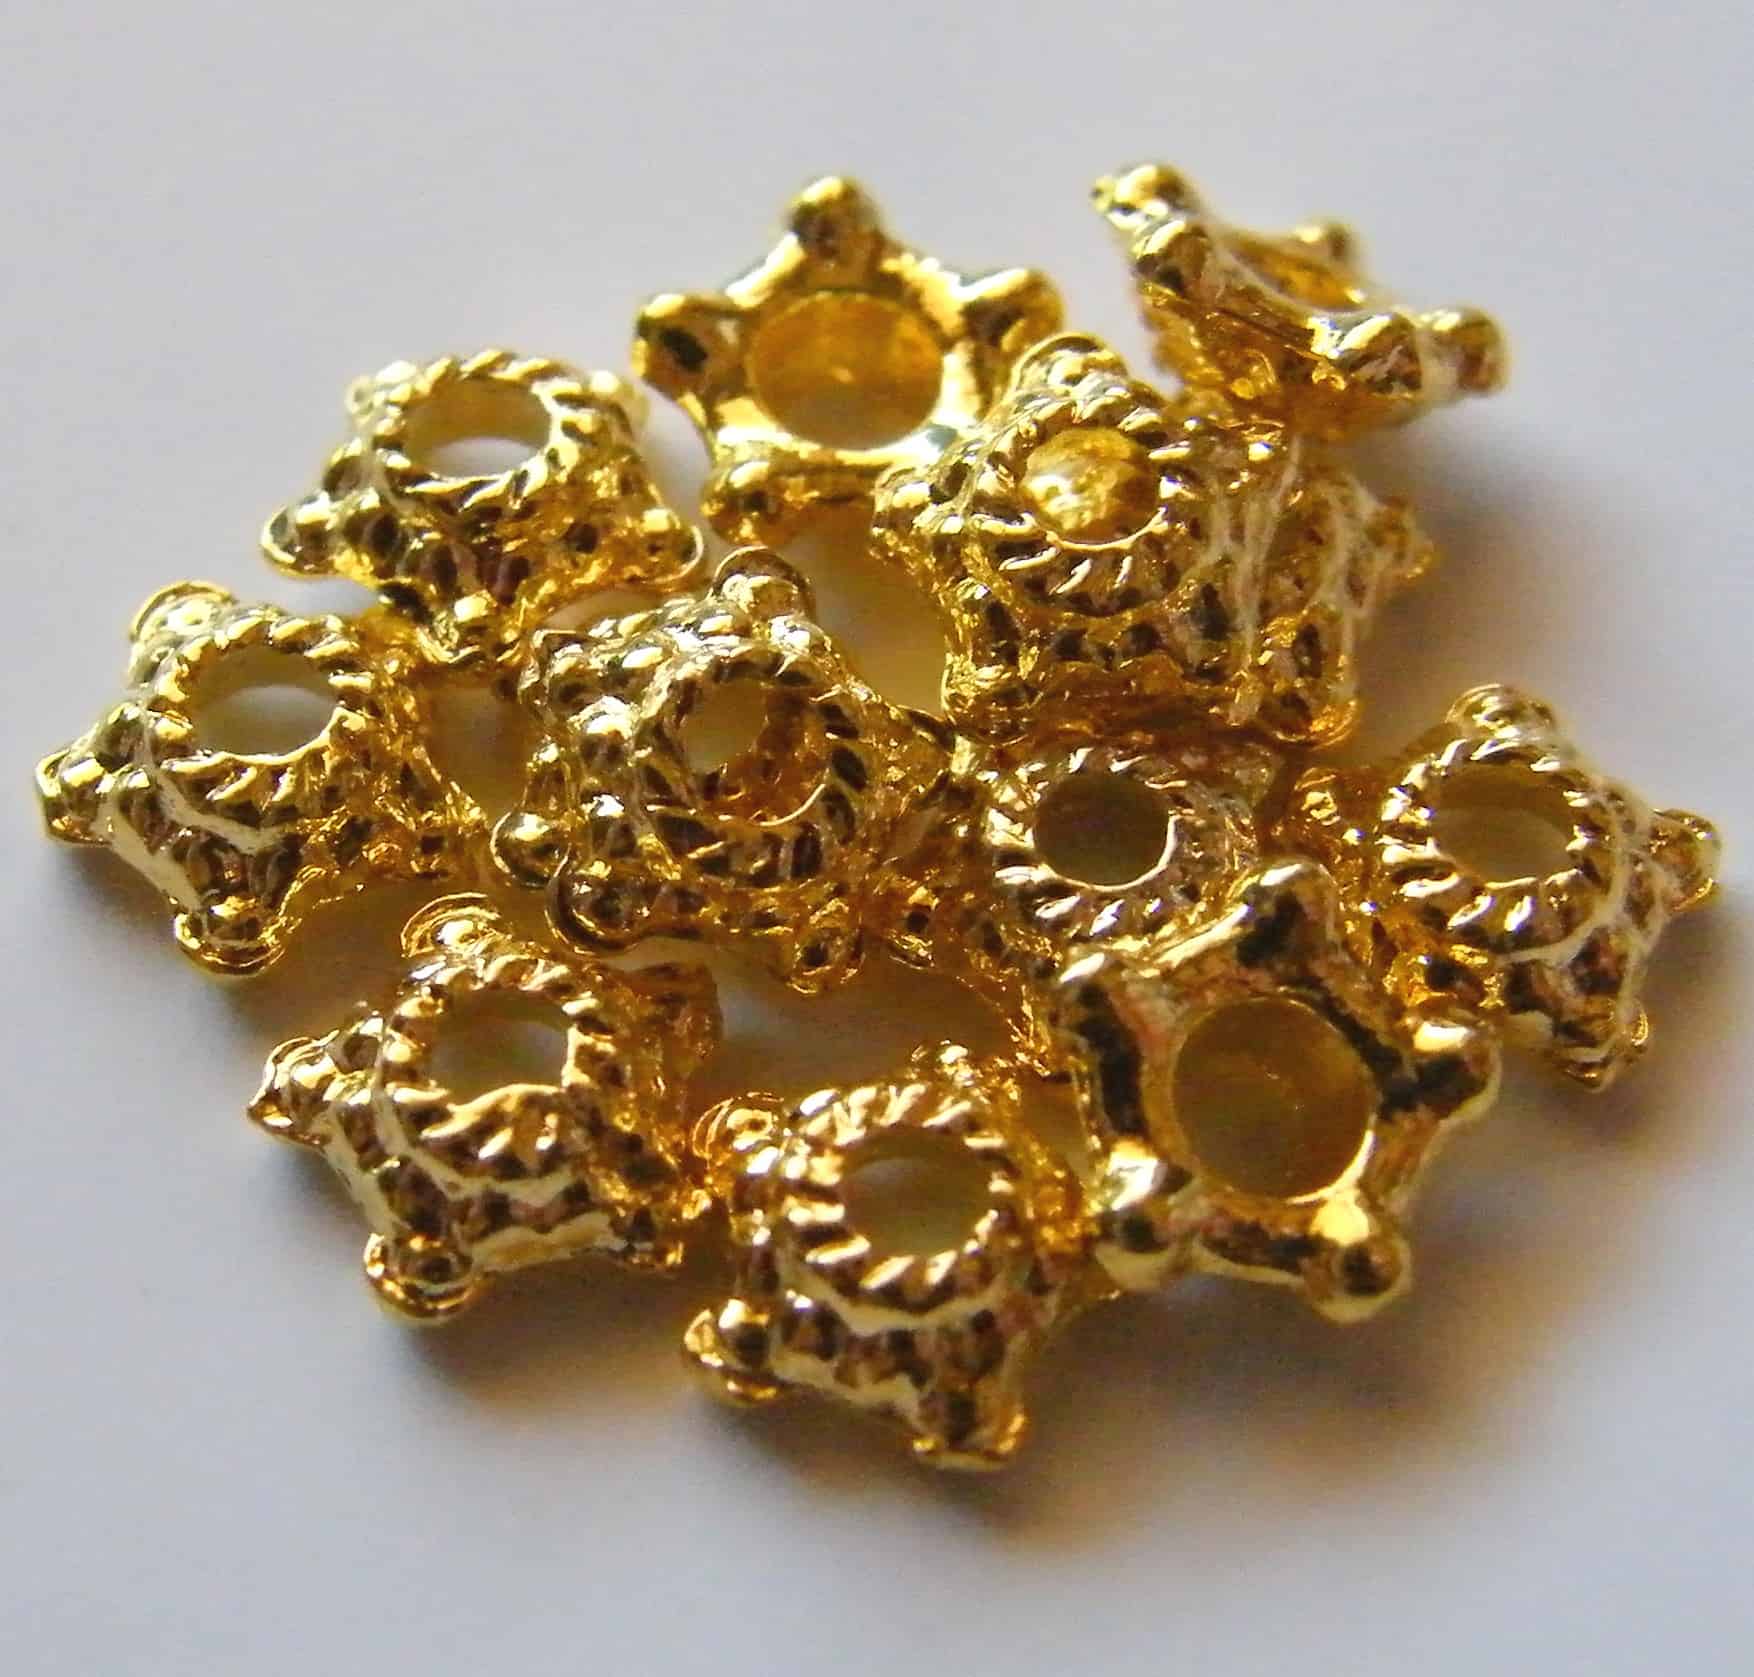 100pcs 6x2mm Metal Alloy Star Spacer Bead Caps - Bright Gold | BeadsForEwe